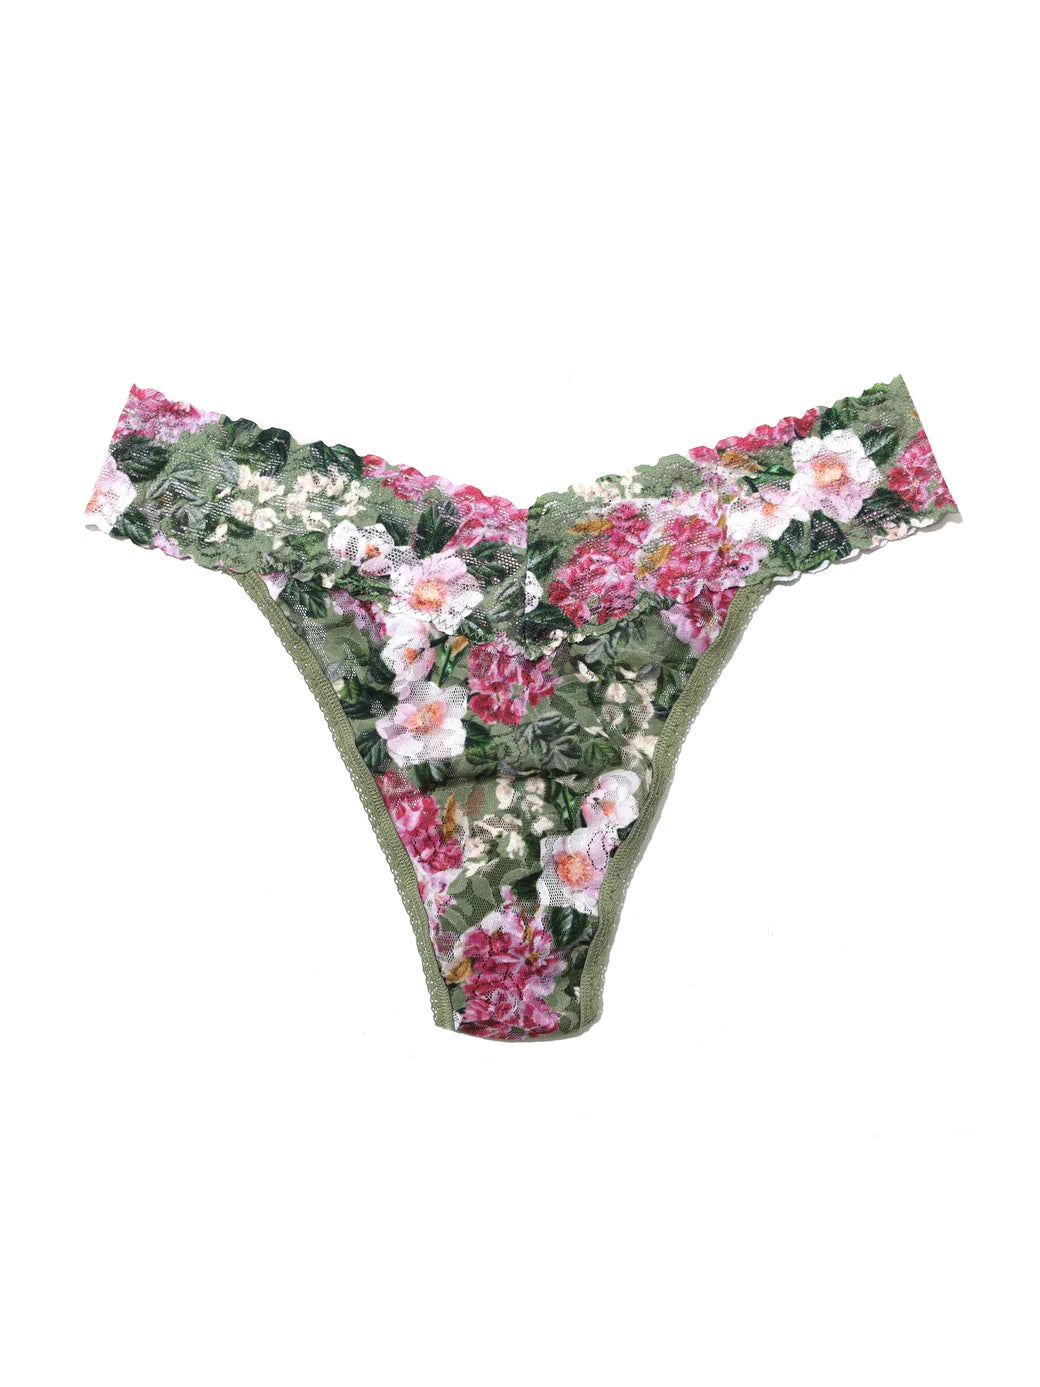 Hanky Panky Signature Lace Printed Low Rise Thong (PR4911P)- Antique Lily